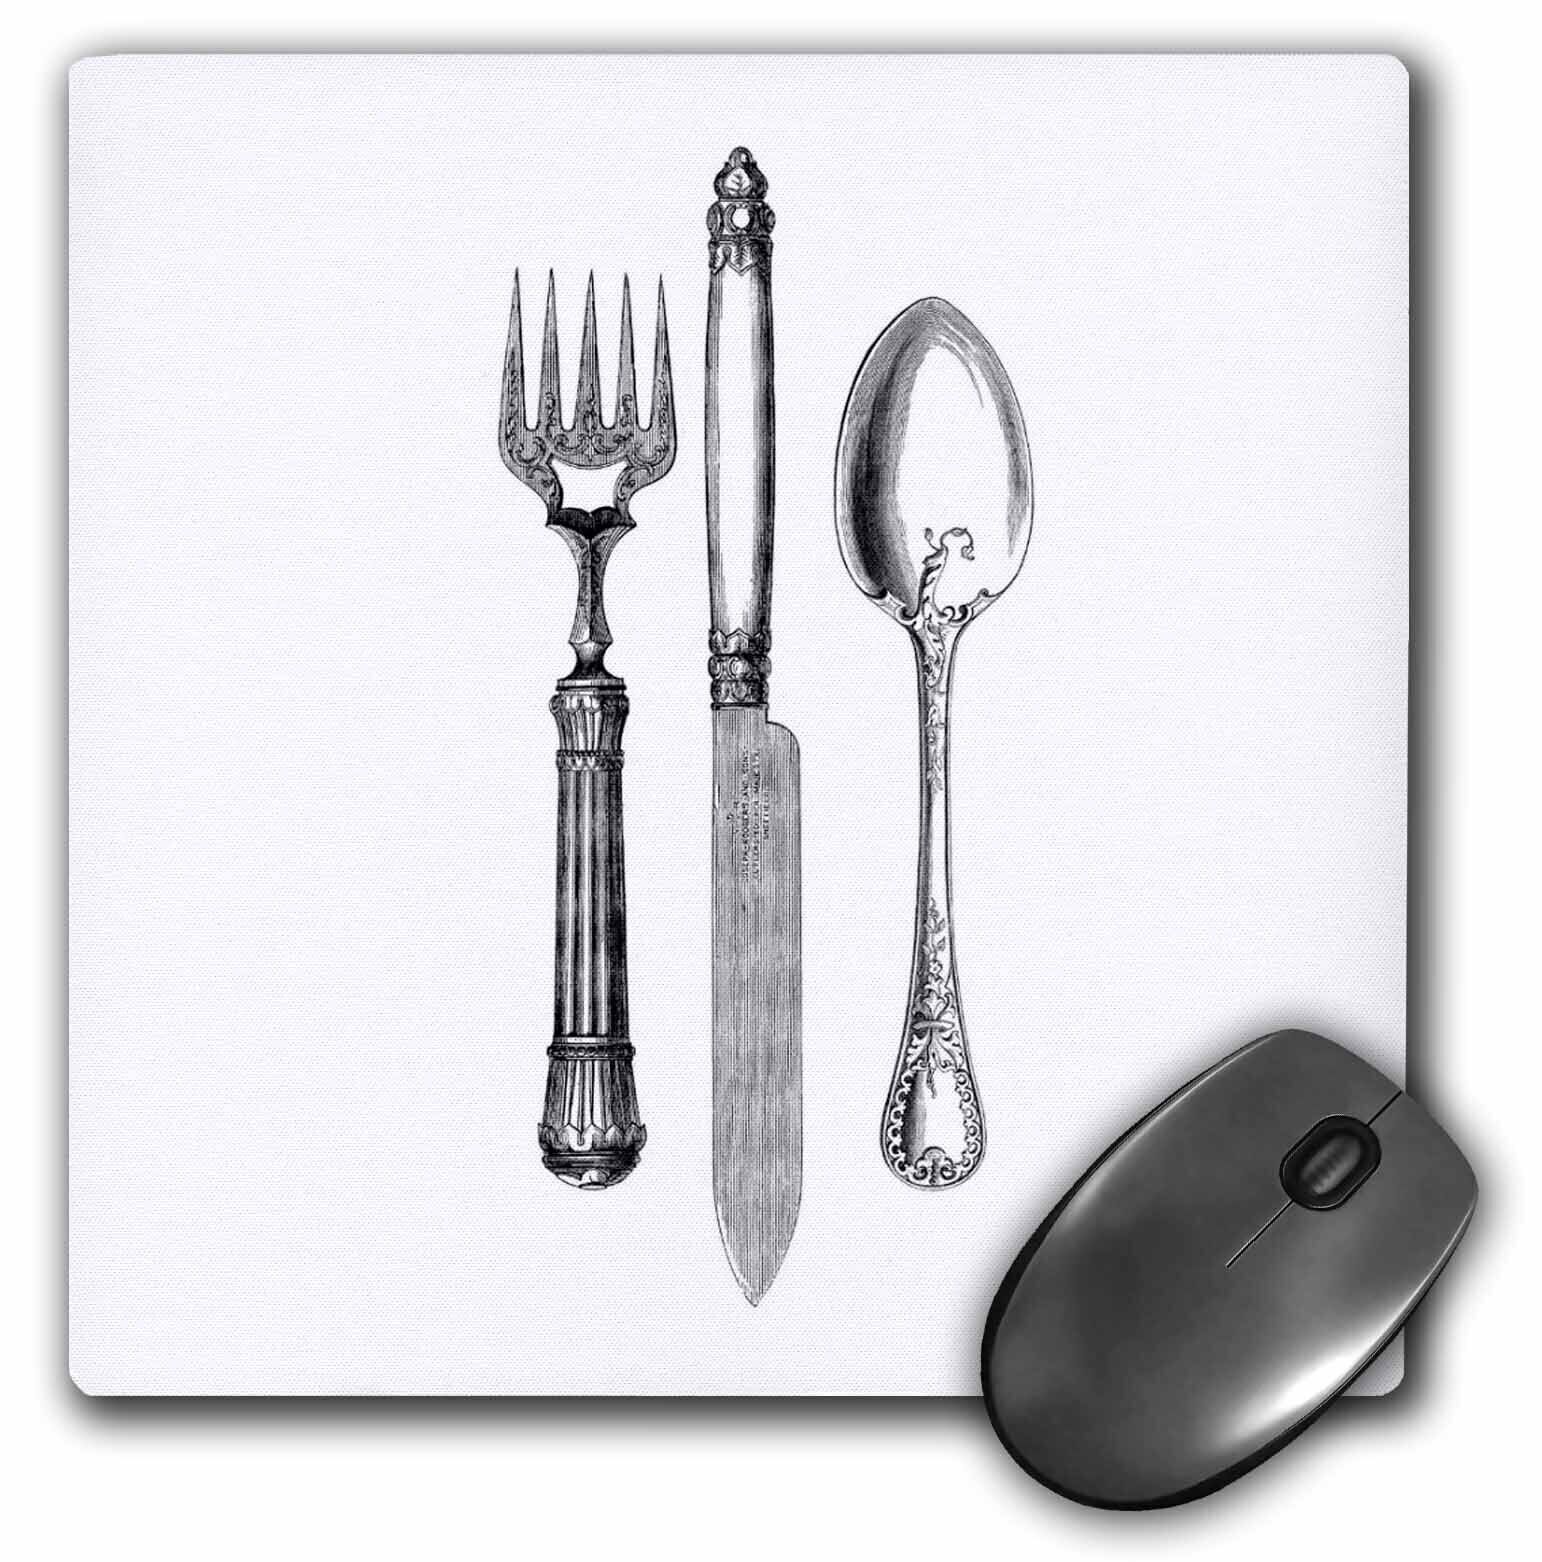 3dRose Black and white vintage cutlery set - fancy fork knife and spoon drawing